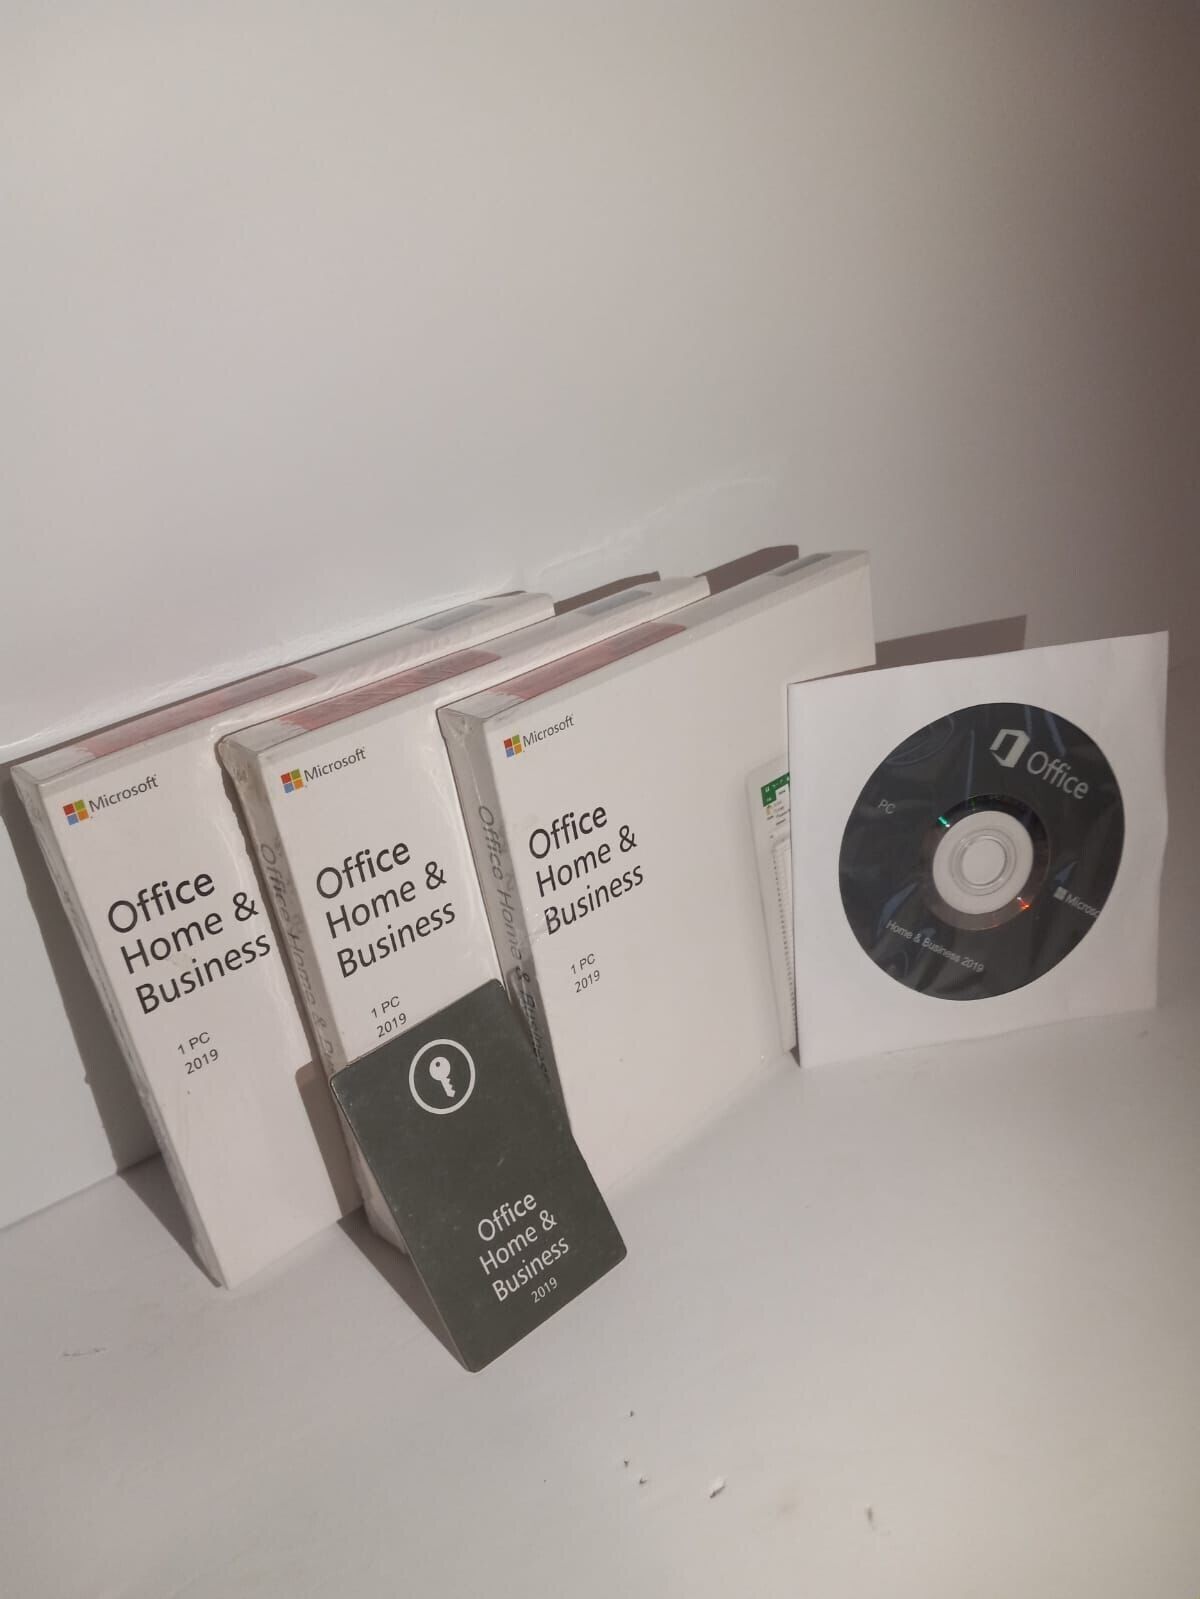 Microsoft Office 2019 Home and Business New Saleed for Pc Disk +key card